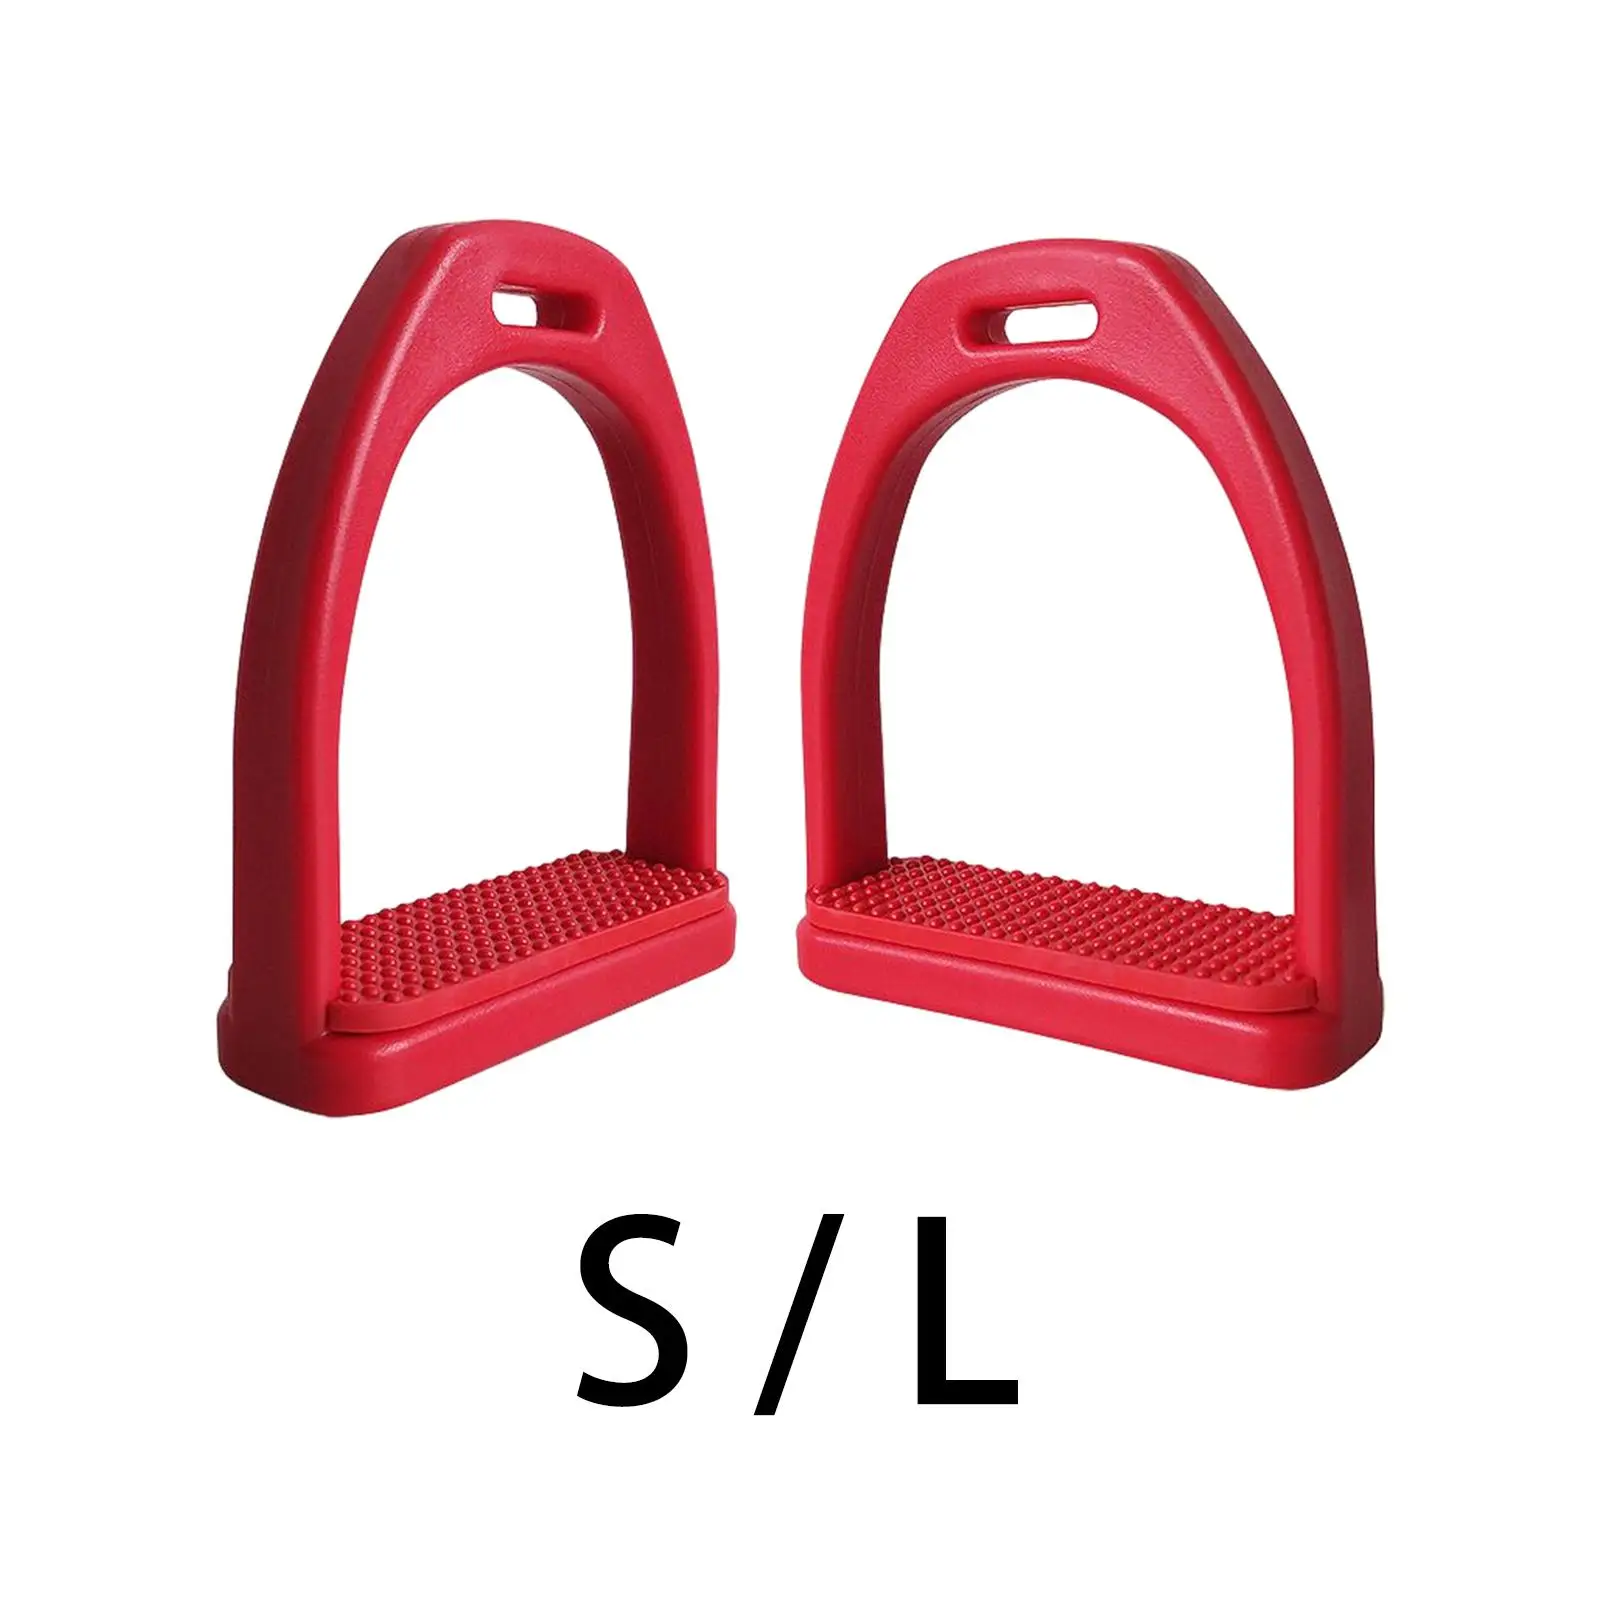 2Pcs Horse Riding Stirrups Equestrian Sports Training Tool Non Slip Rubber Pad for Horse Riding Outdoor Equipment Kids Adults